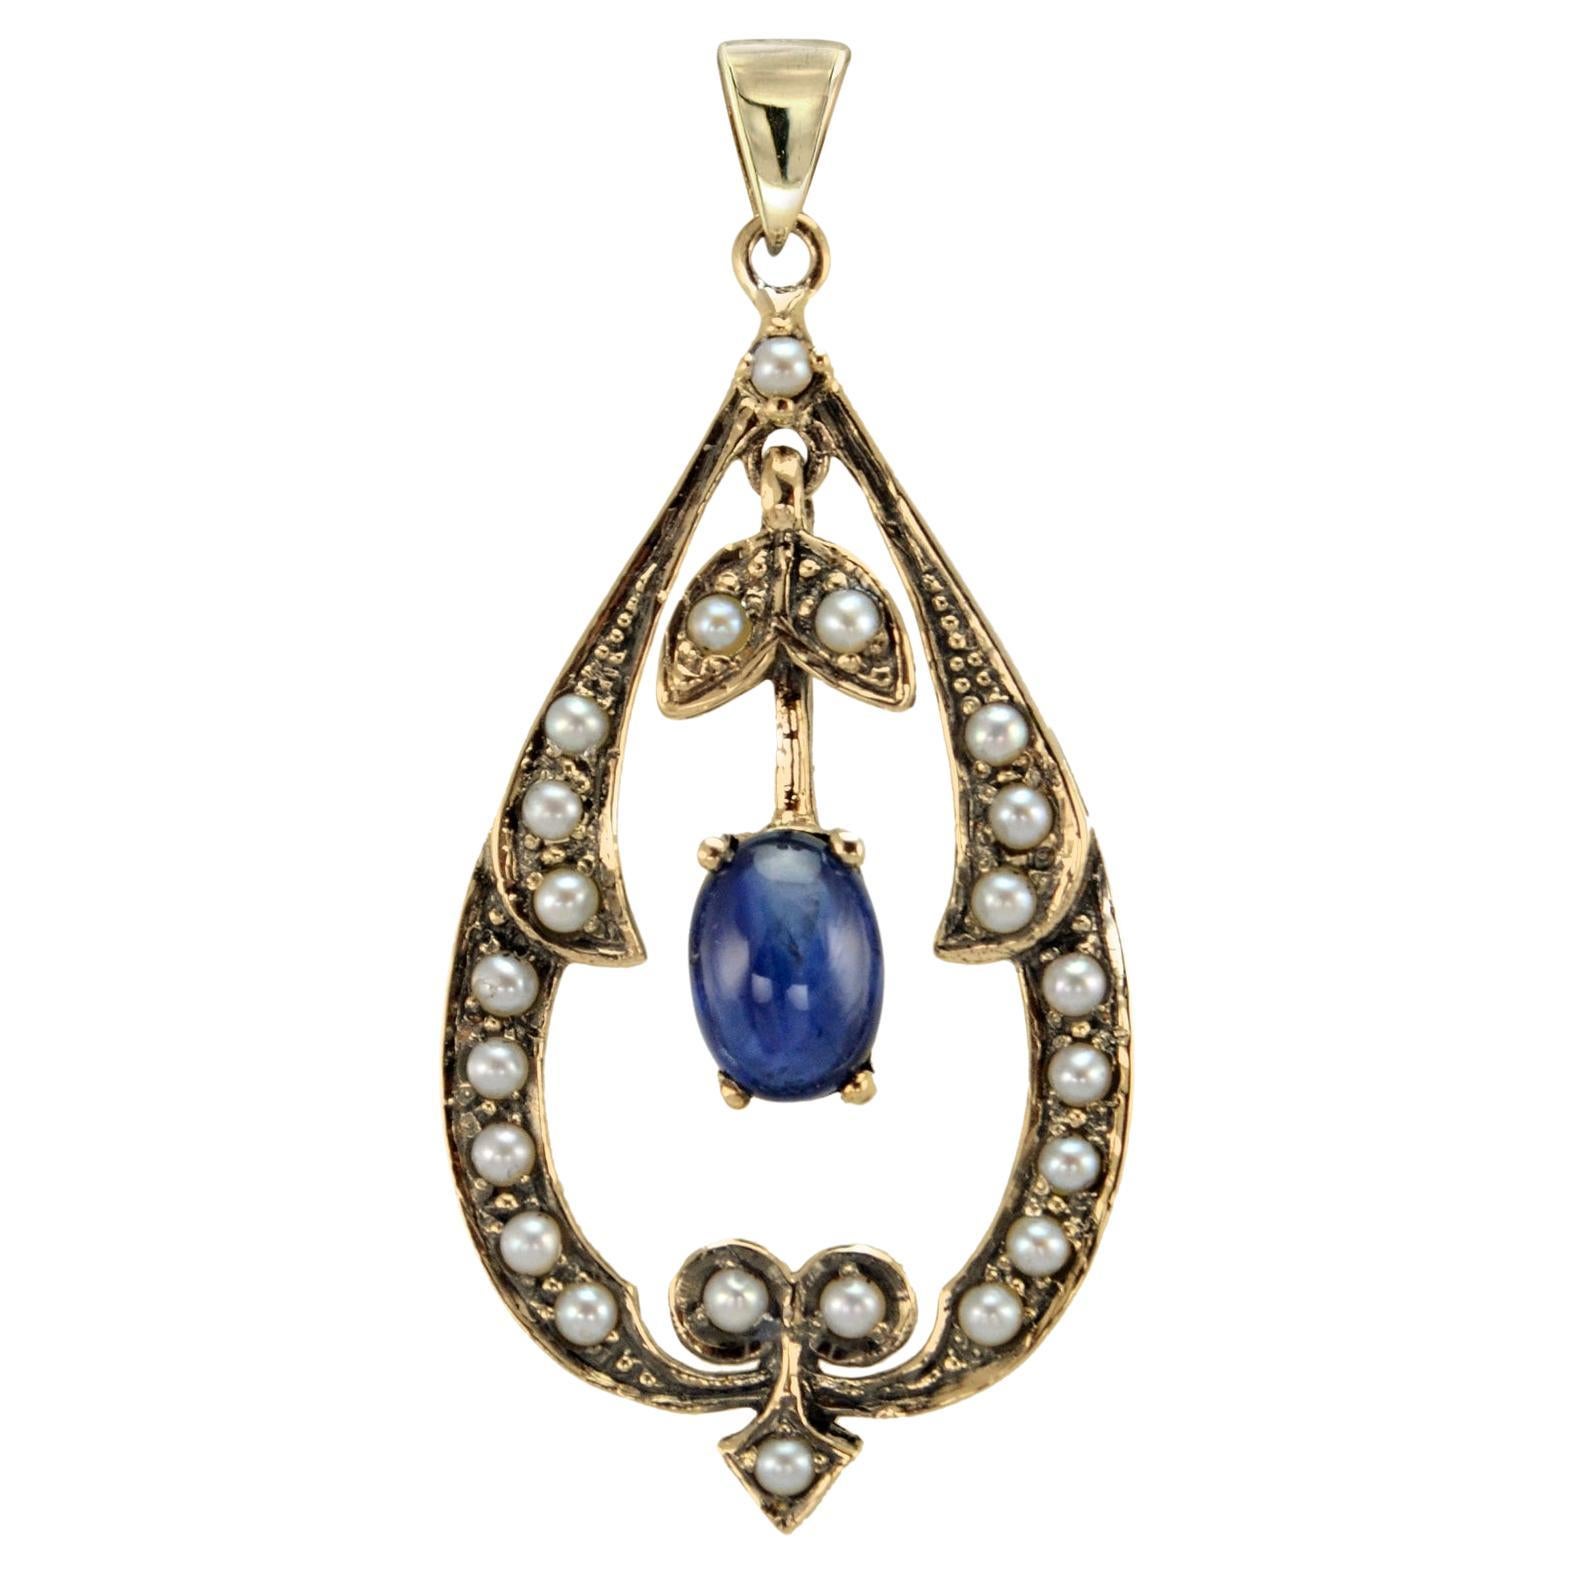 Natural Cabochon Sapphire Pearl Vintage Style Pendant in solid 9K Yellow Gold